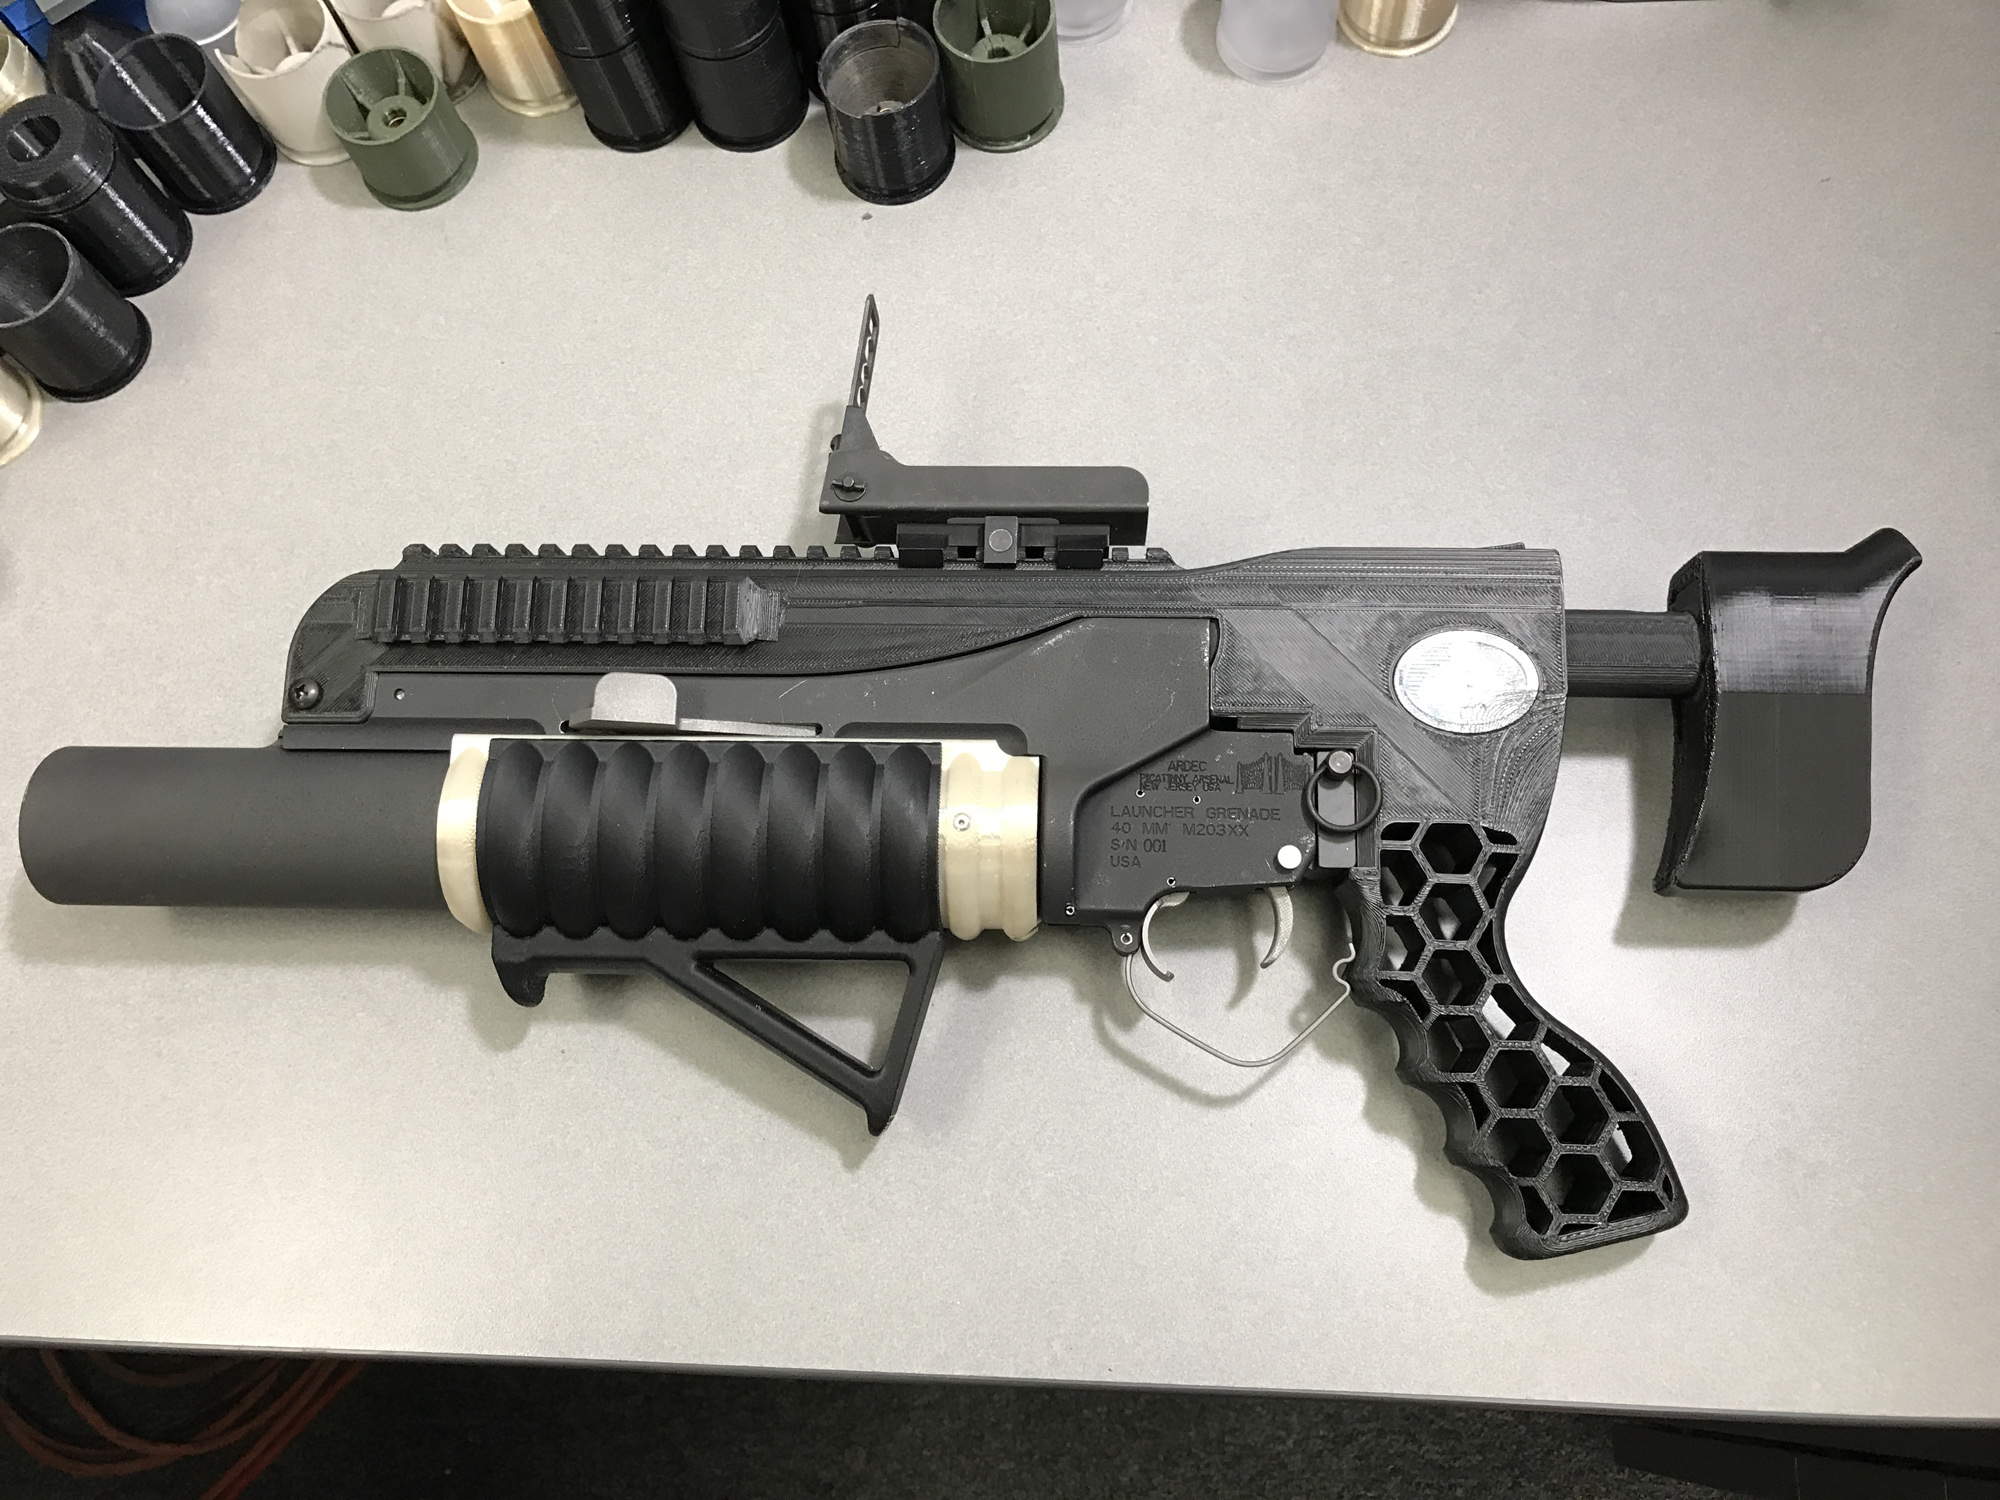 Left-wing media LIES about 3D-printed guns, falsely claims they are “undetectable” deadly weapons